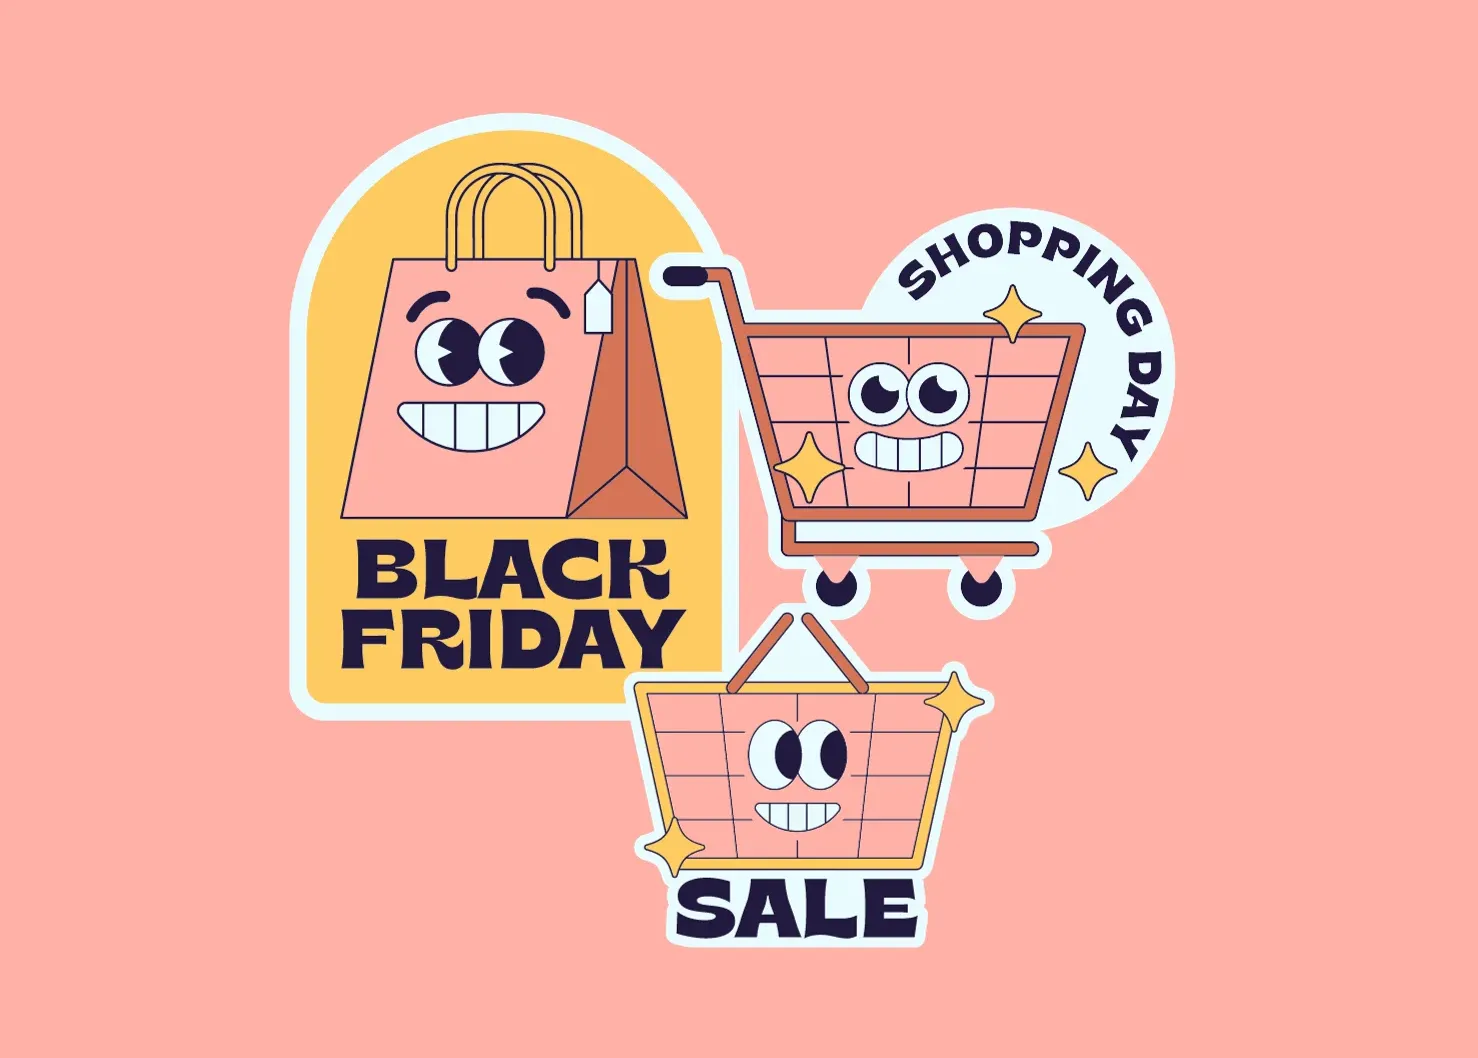 How to Prepare Your Business for Black Friday?